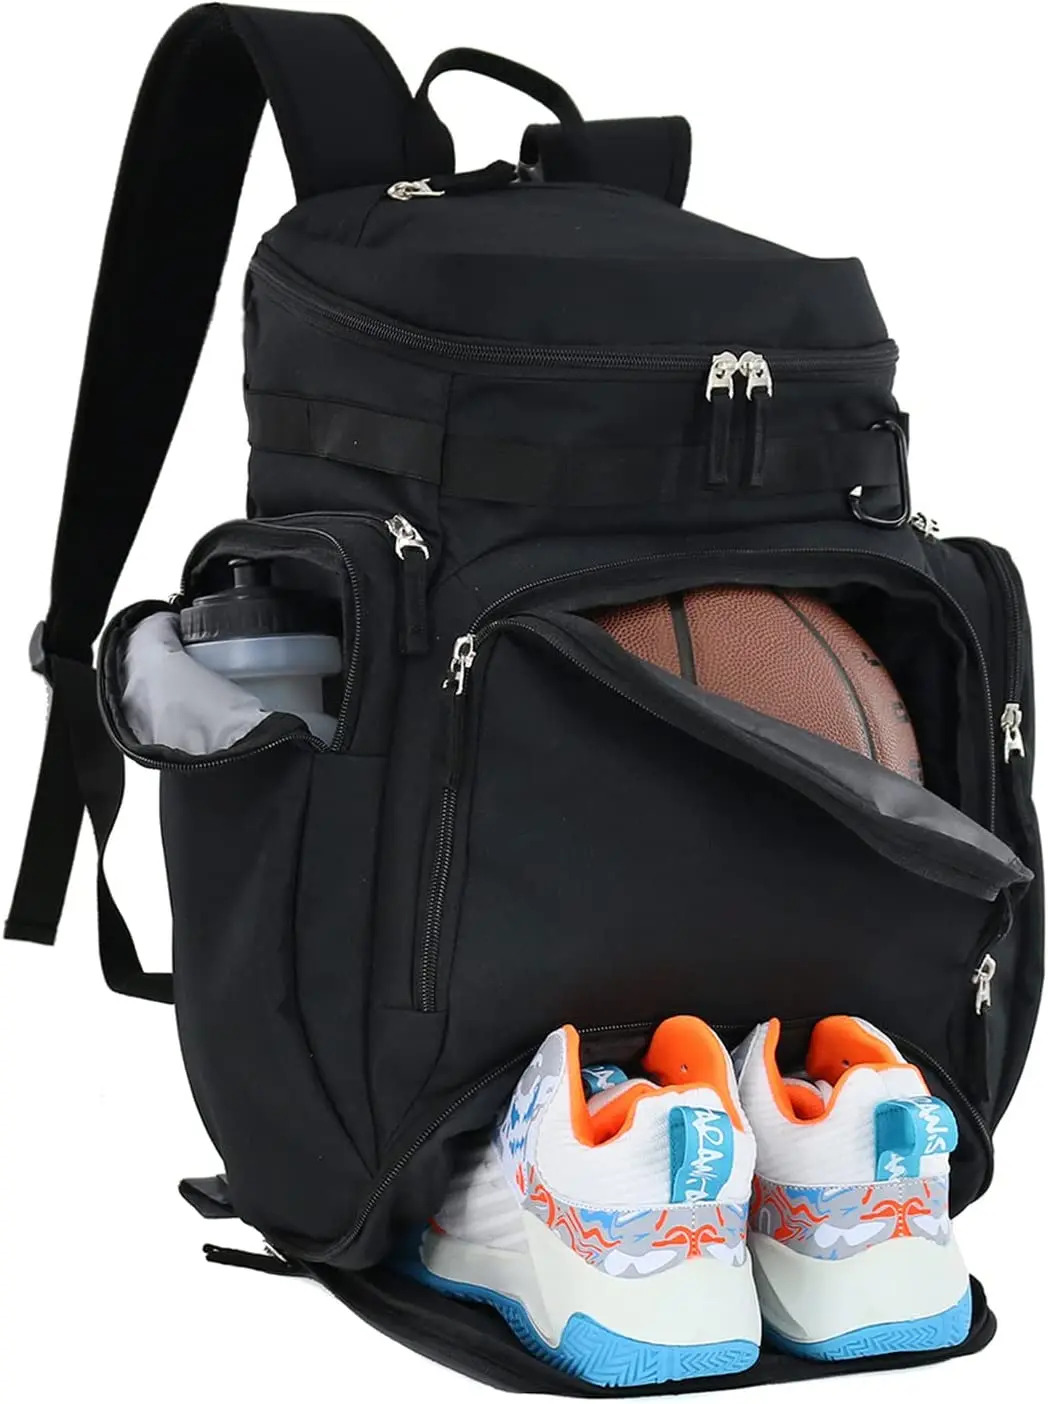 

With Volleyball Large Sport Backpack Backpack, Bag And Shoe Baseball, Softball, Compartment, Bag Backpack Soccer Ball Basketball